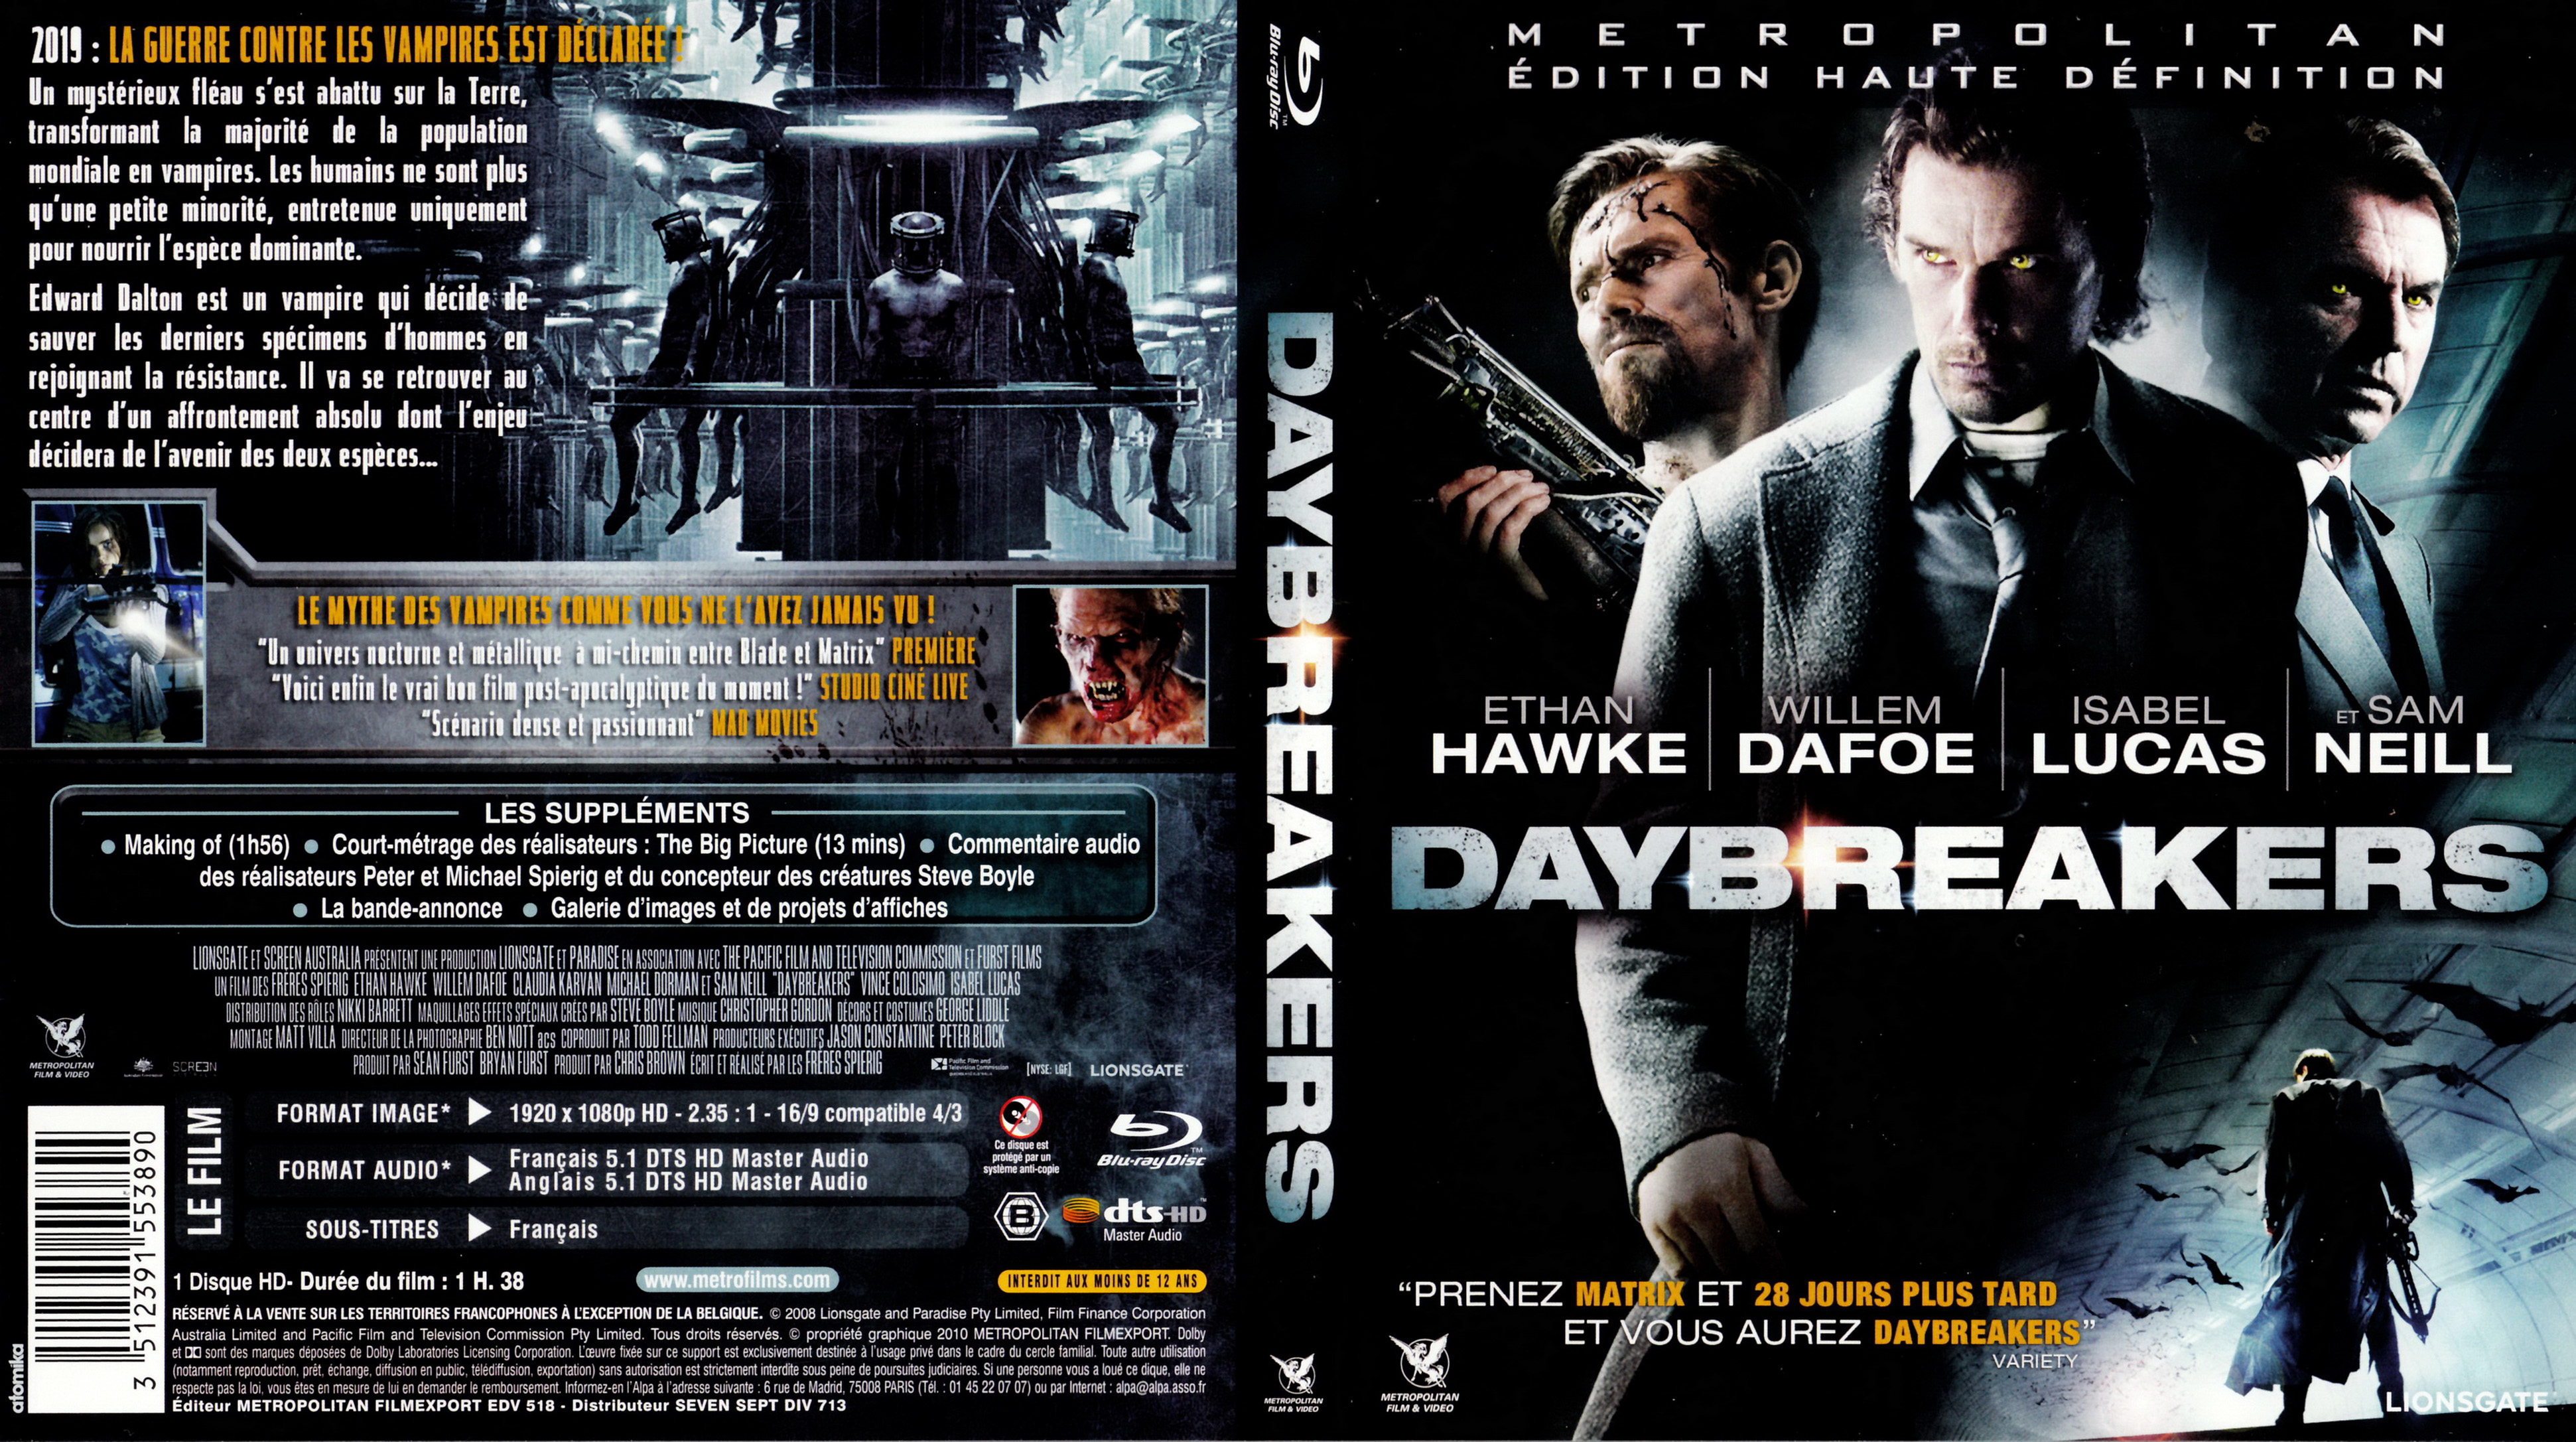 Jaquette DVD Daybreakers (BLU-RAY)